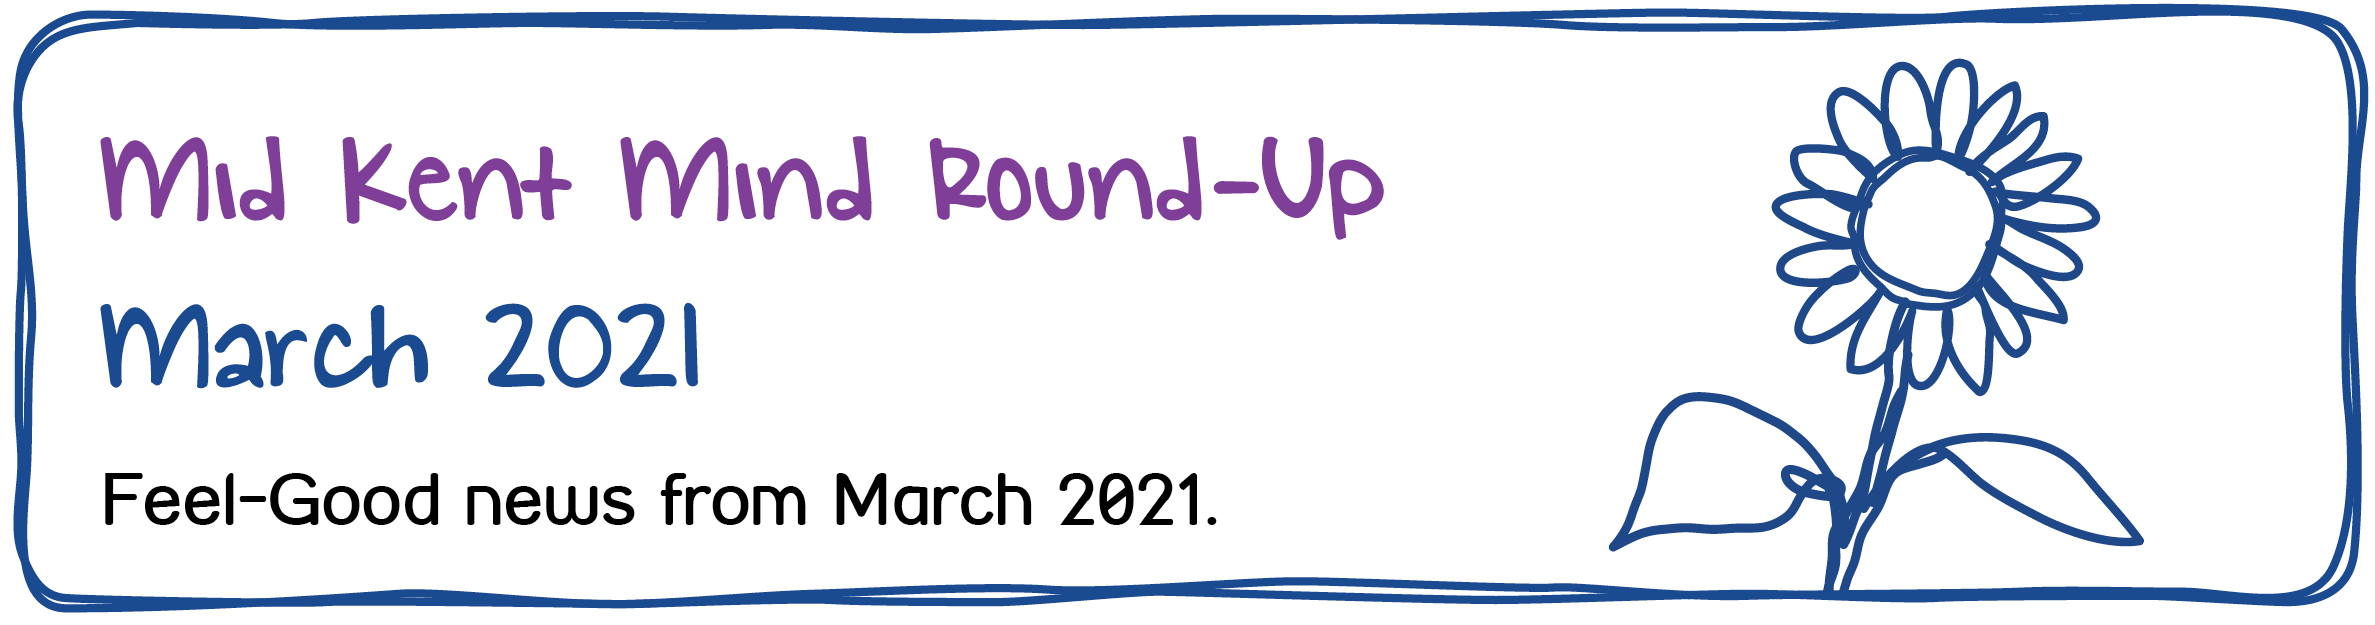 Mid Kent Mind Newsletter - March 2021 - Mid Kent Mind Round-Up. March 2021. Feel-Good news from March 2021.